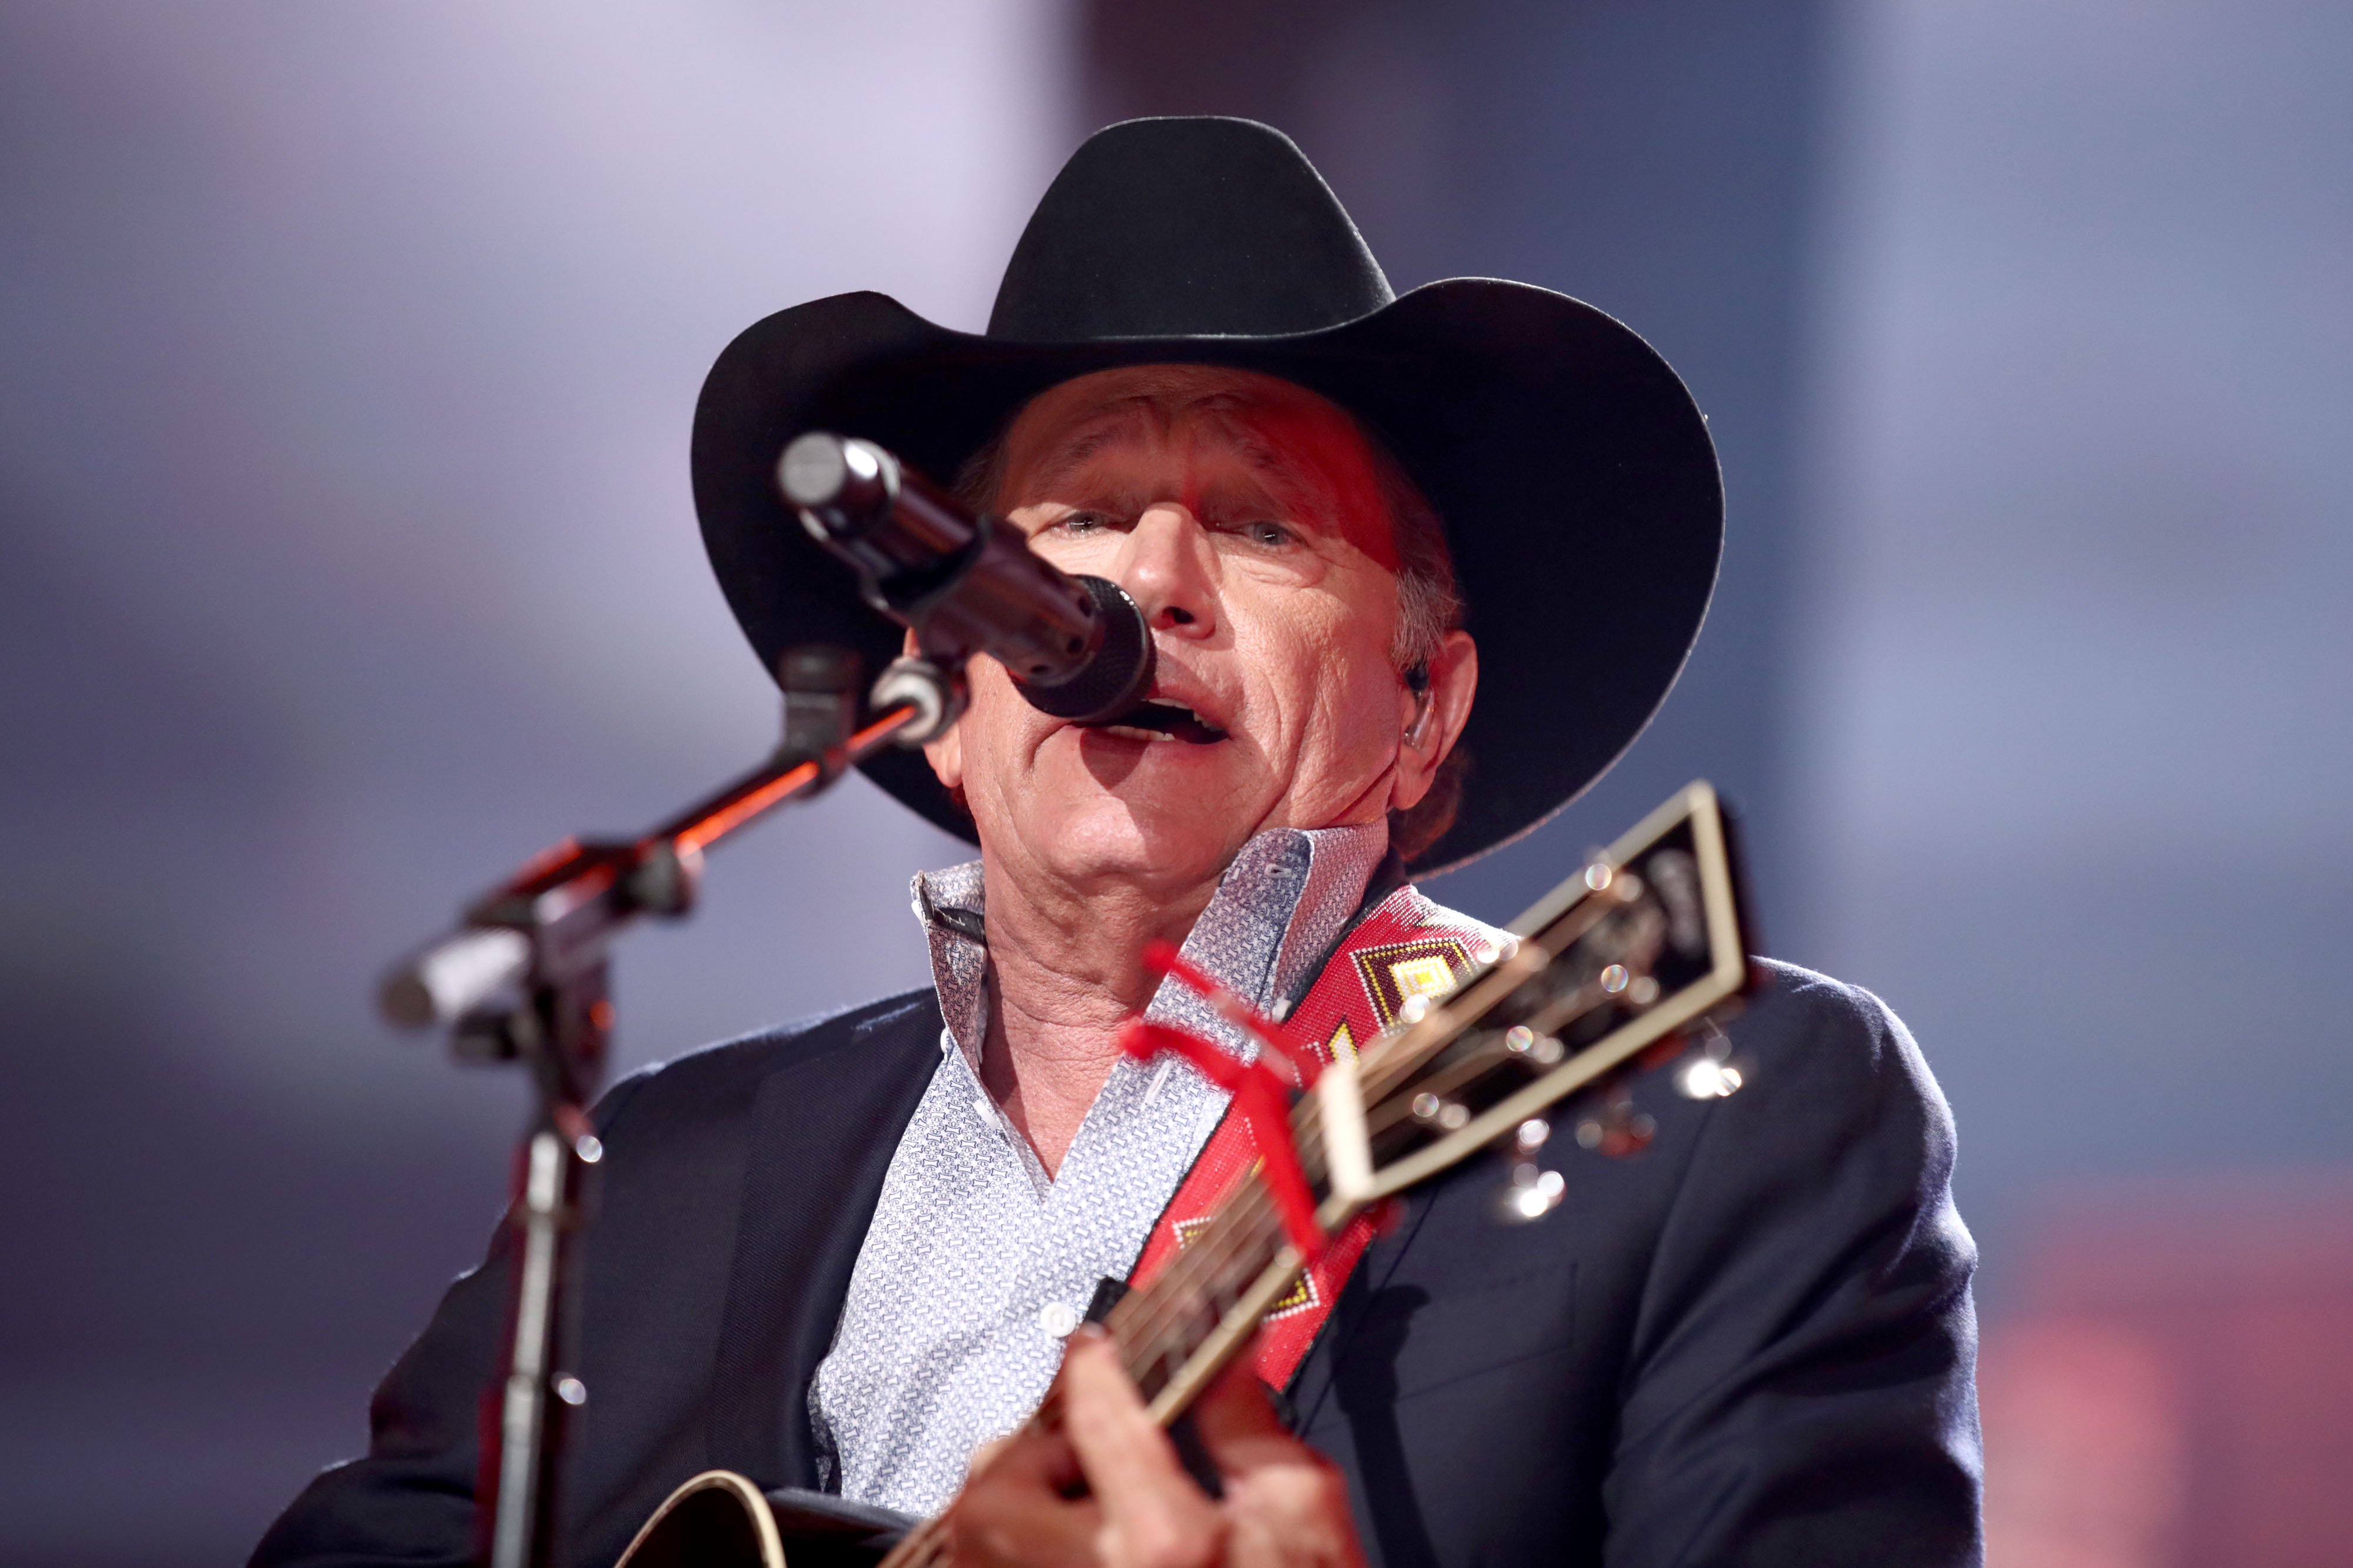 Country singer George Strait on April 7, 2019 in Las Vegas Nevada | Source: Getty Images